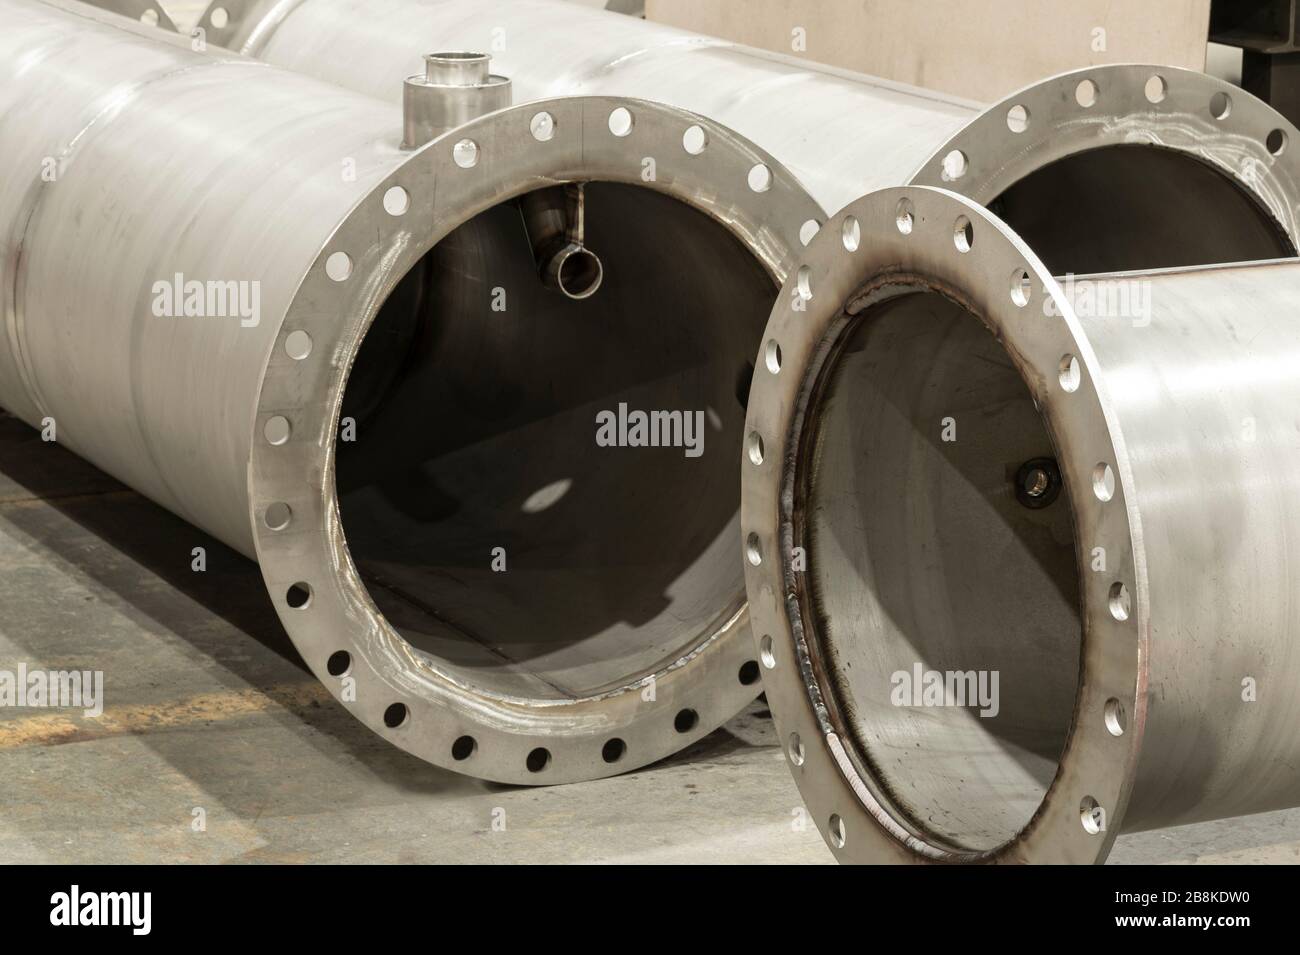 Large pipe production in industrial manufacturing plant Stock Photo